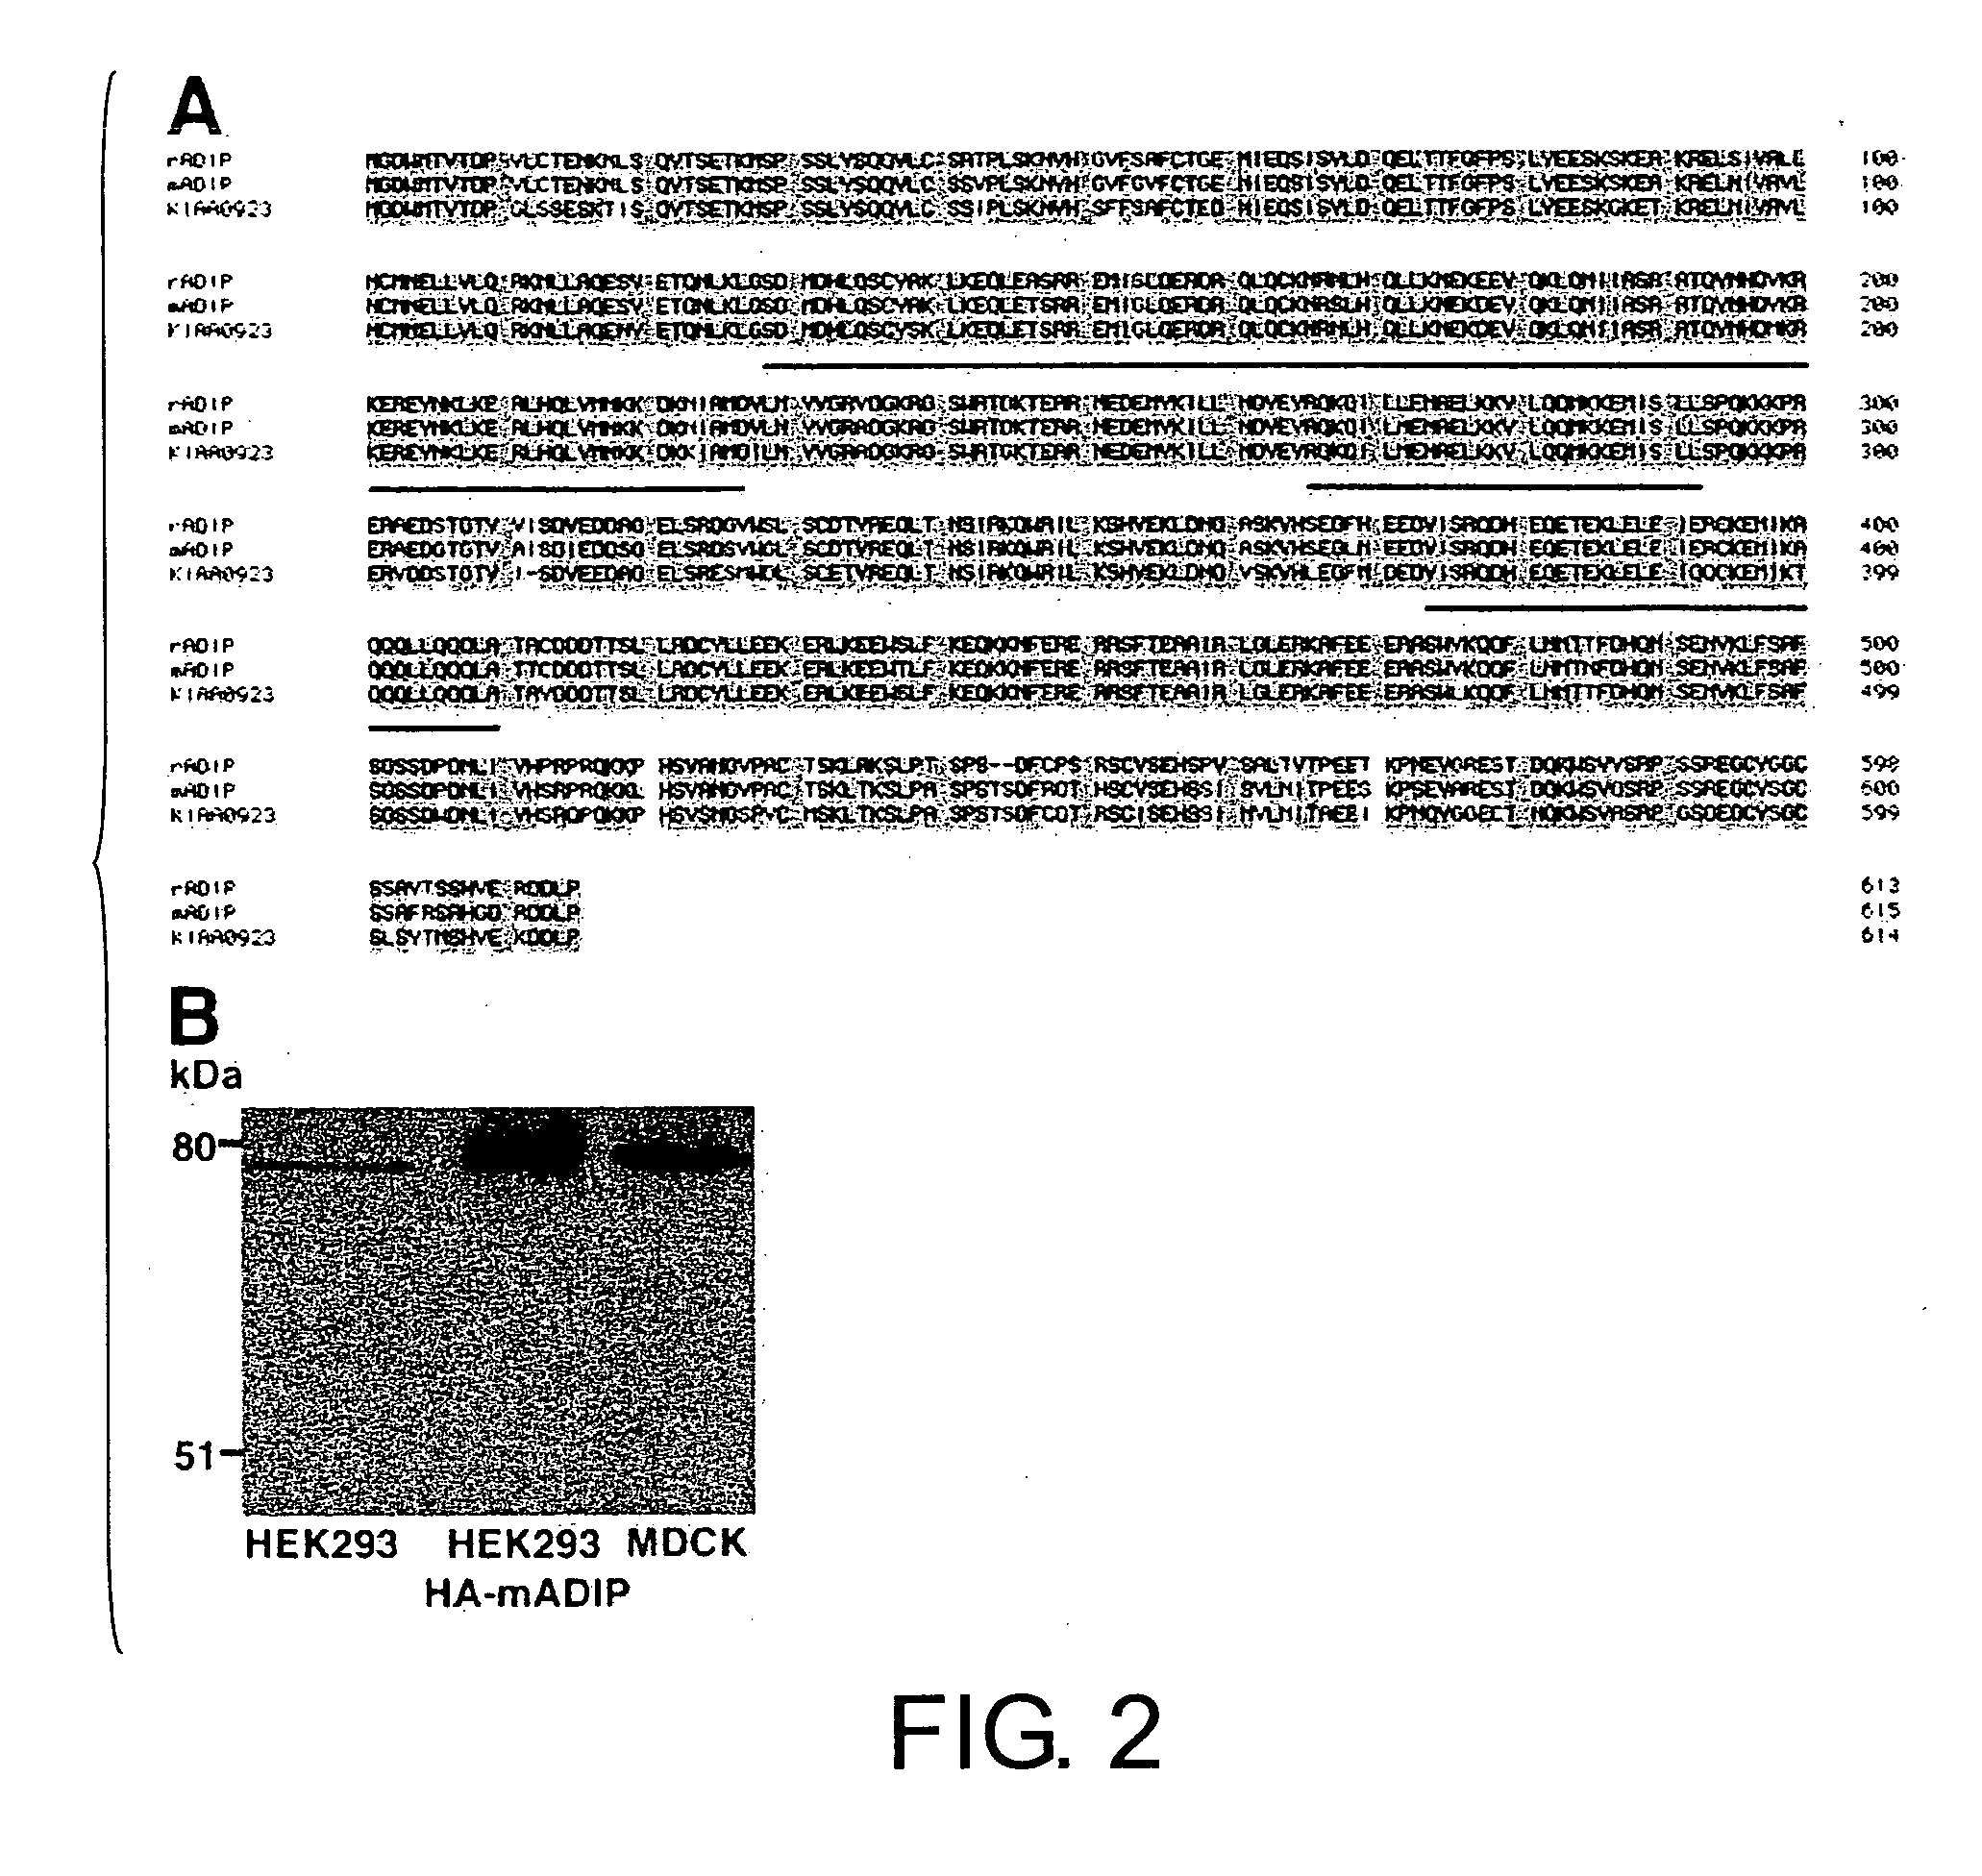 ADIP protein and use thereof